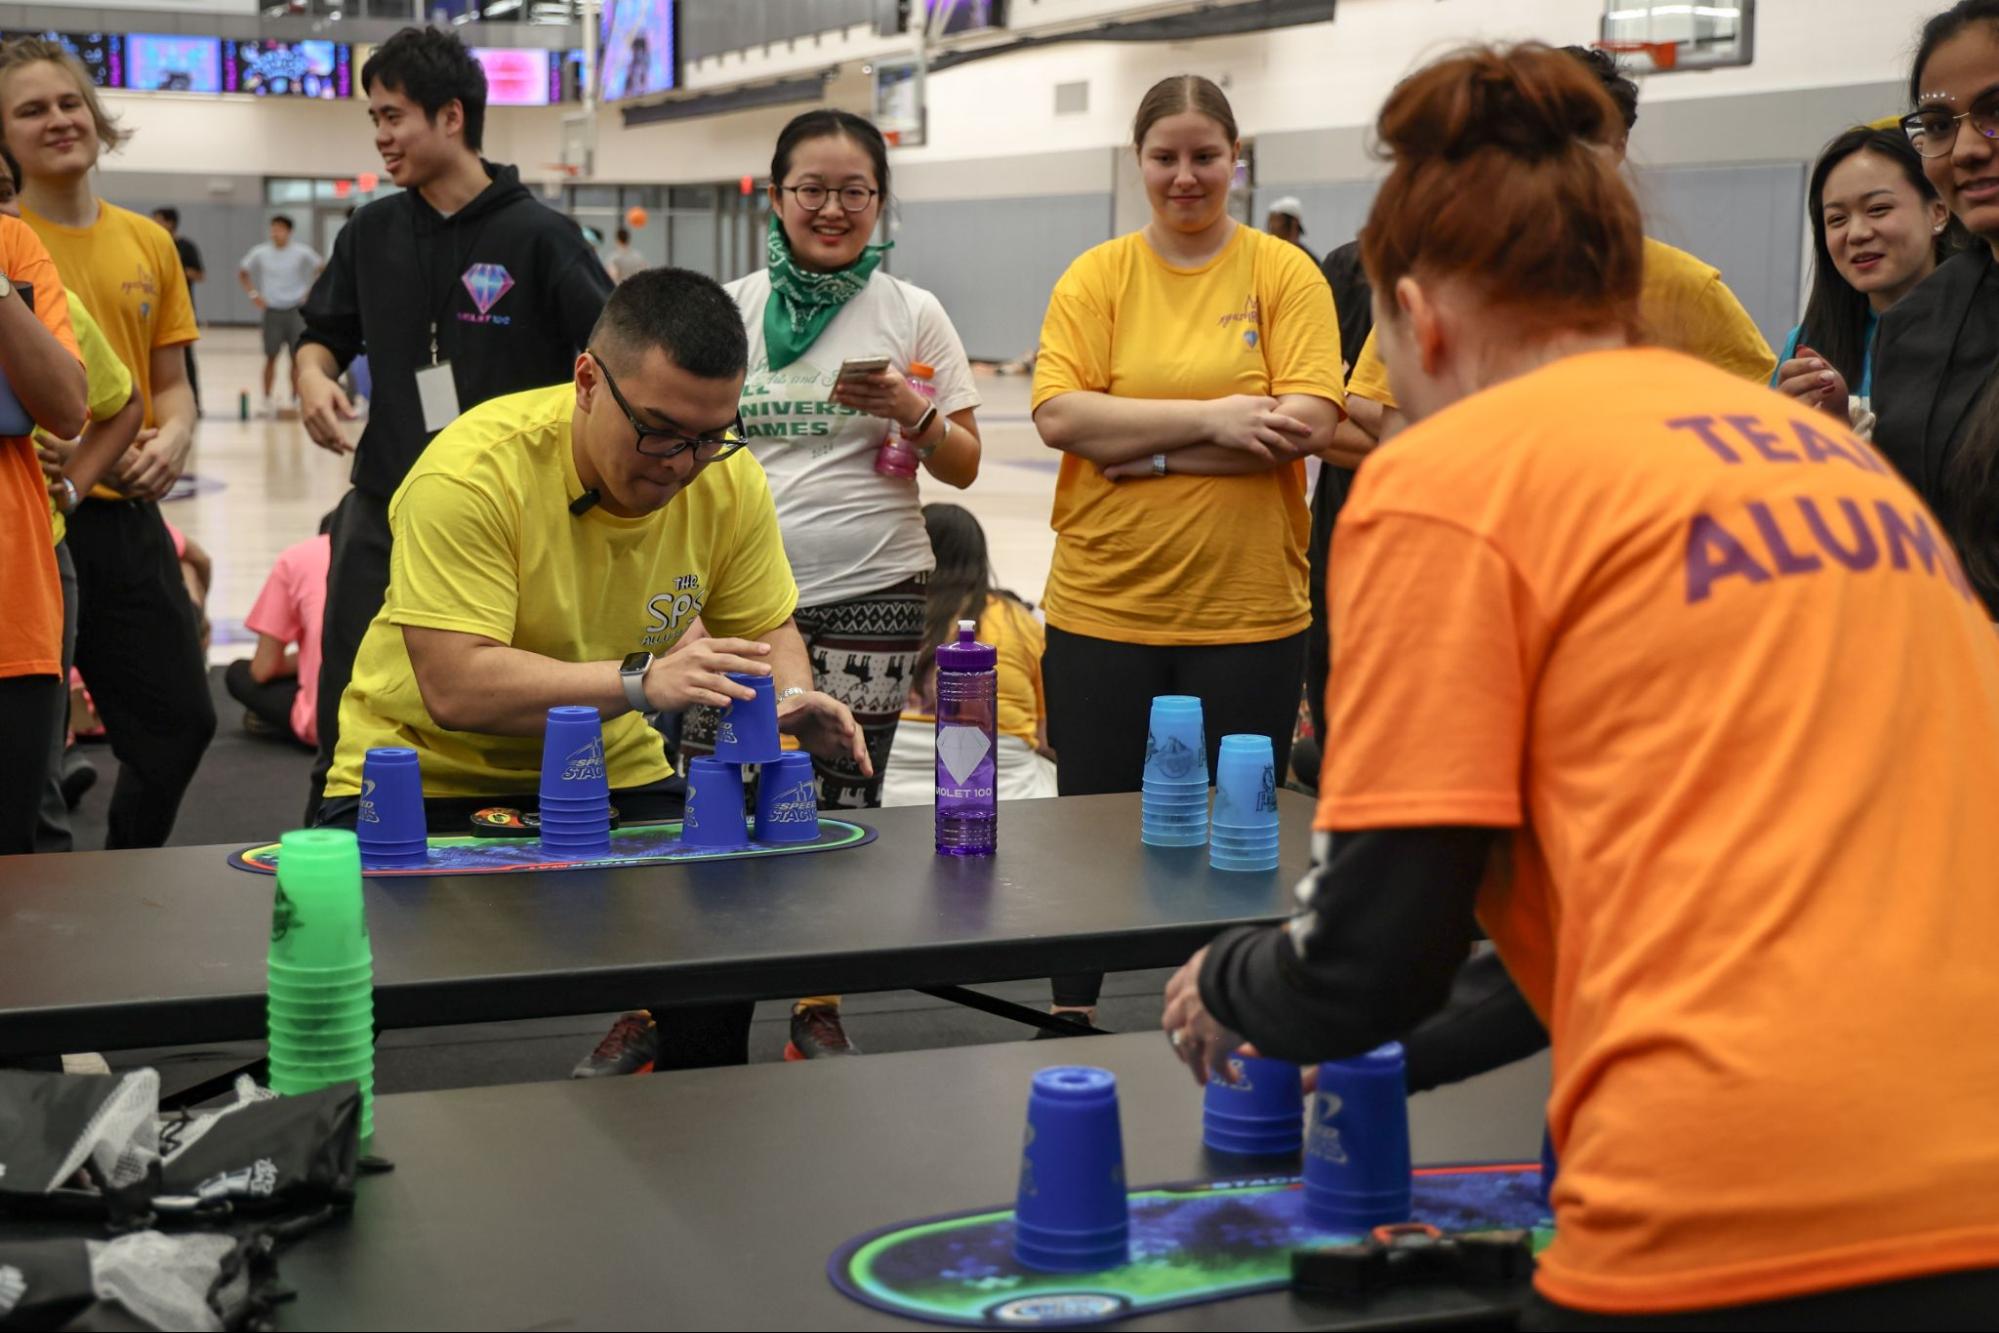 A man in yellow and a woman in orange stack cups across from each other while people stand around them watching.